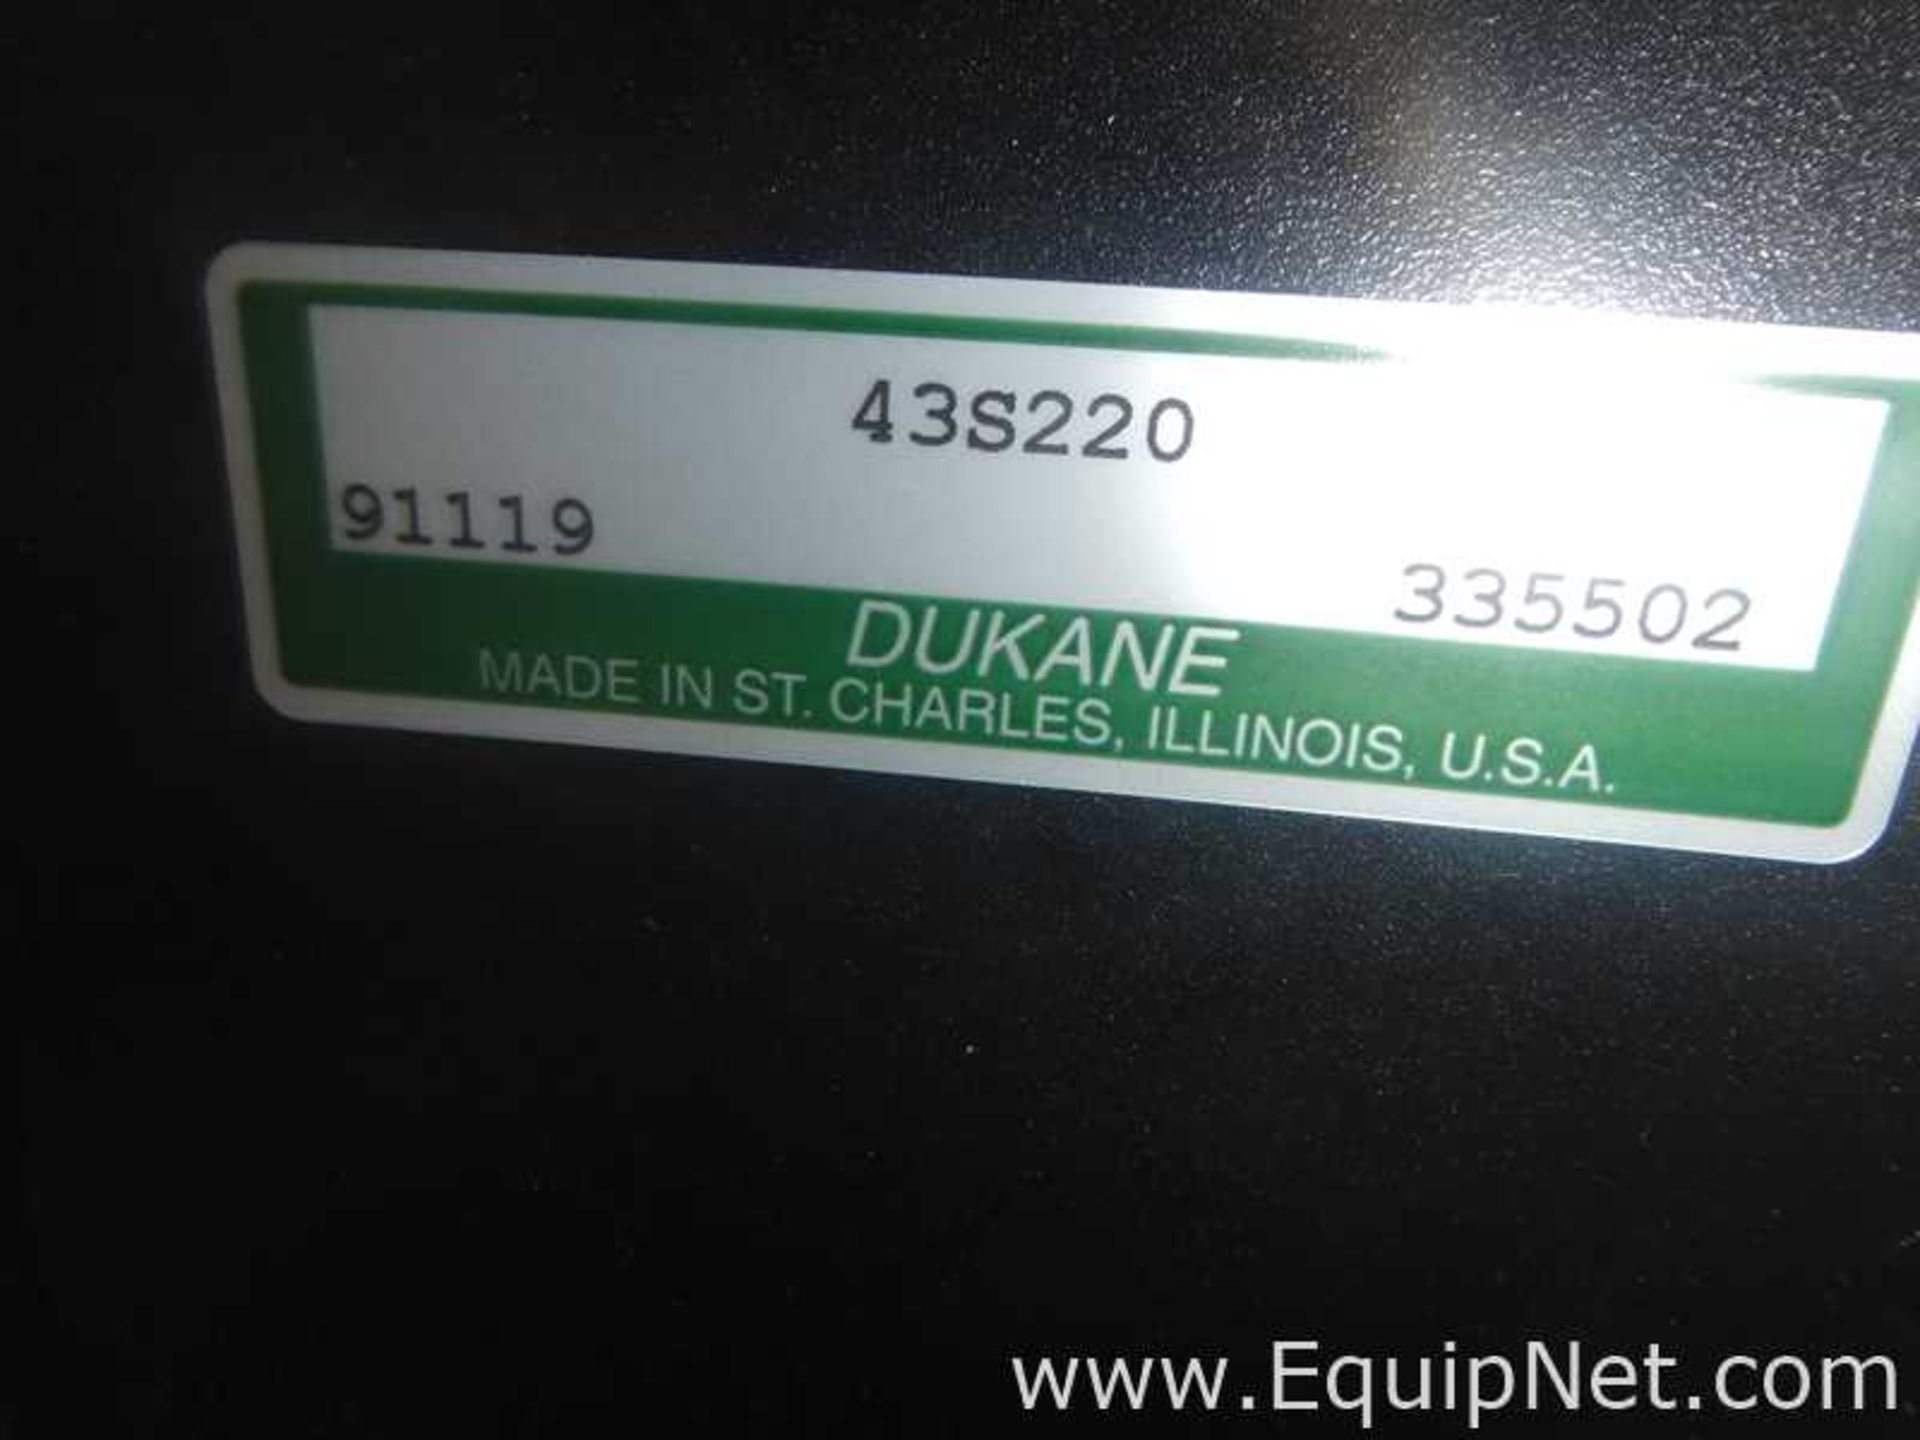 Unused Dukane iQ Sevo Ultrasonic Welding Units And Controller NEW IN CRATE - Image 5 of 5